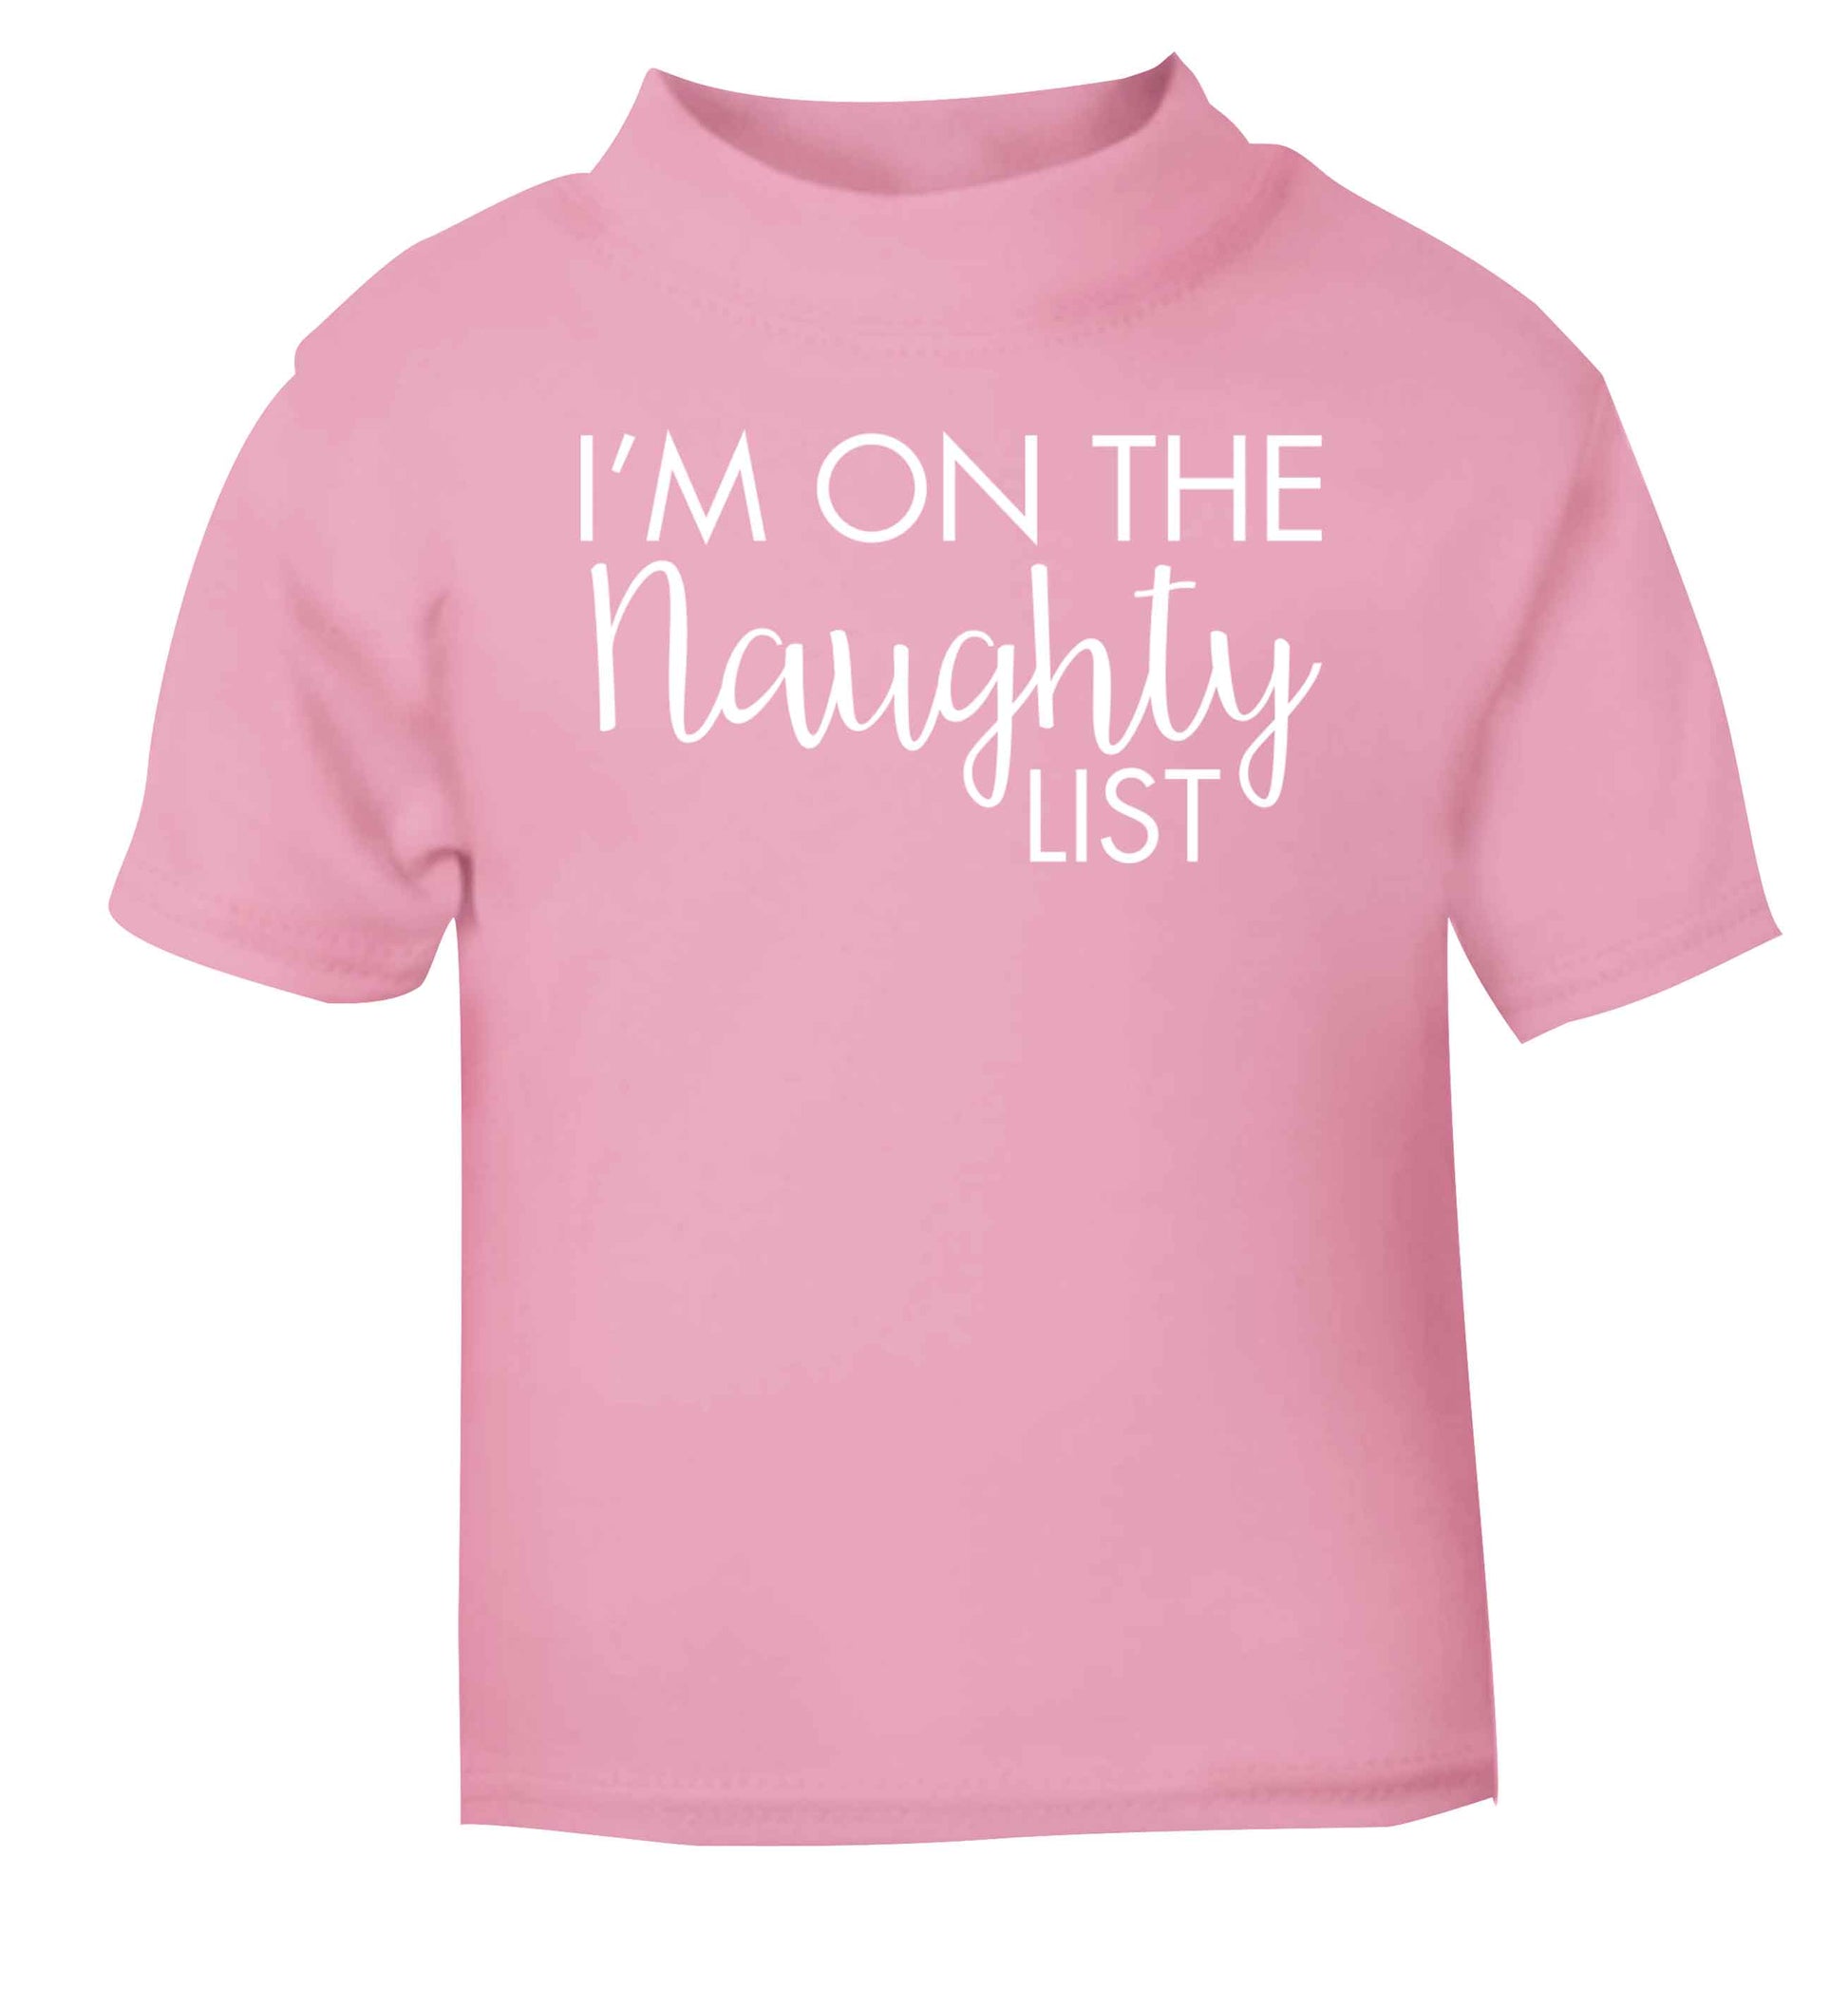 I'm on the naughty list light pink baby toddler Tshirt 2 Years